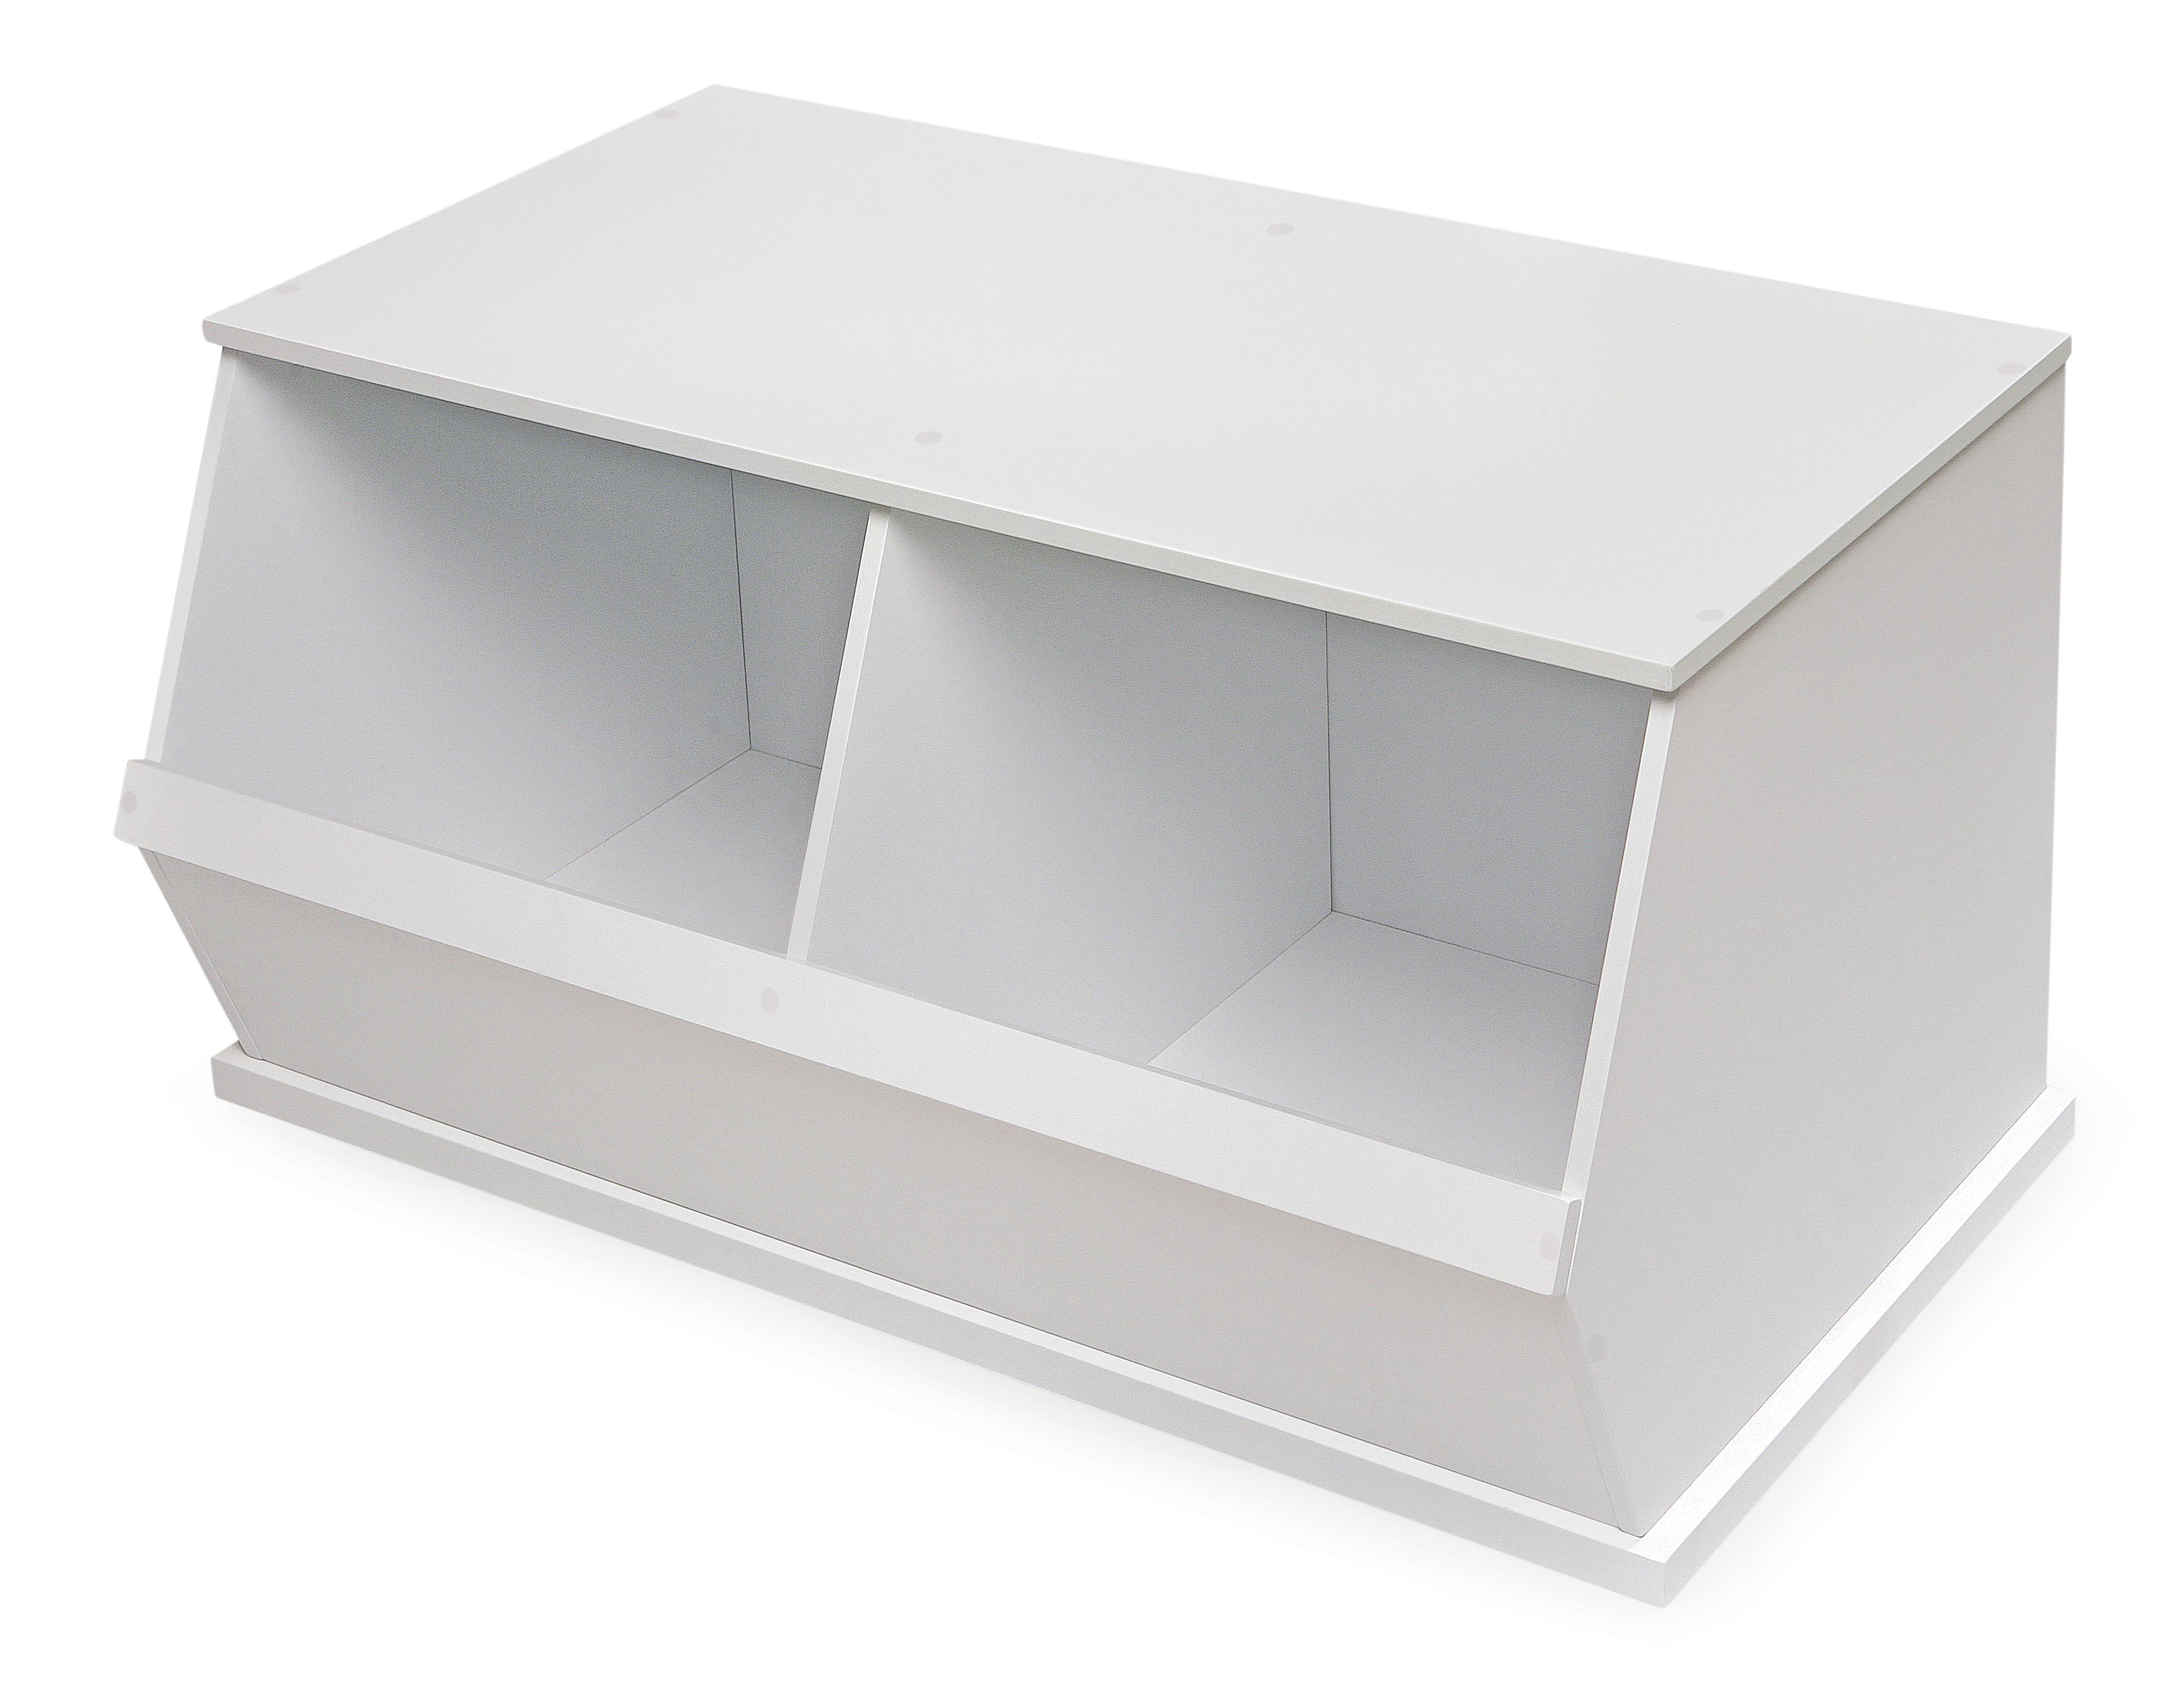 Two Bin Stackable Storage Cubby - White